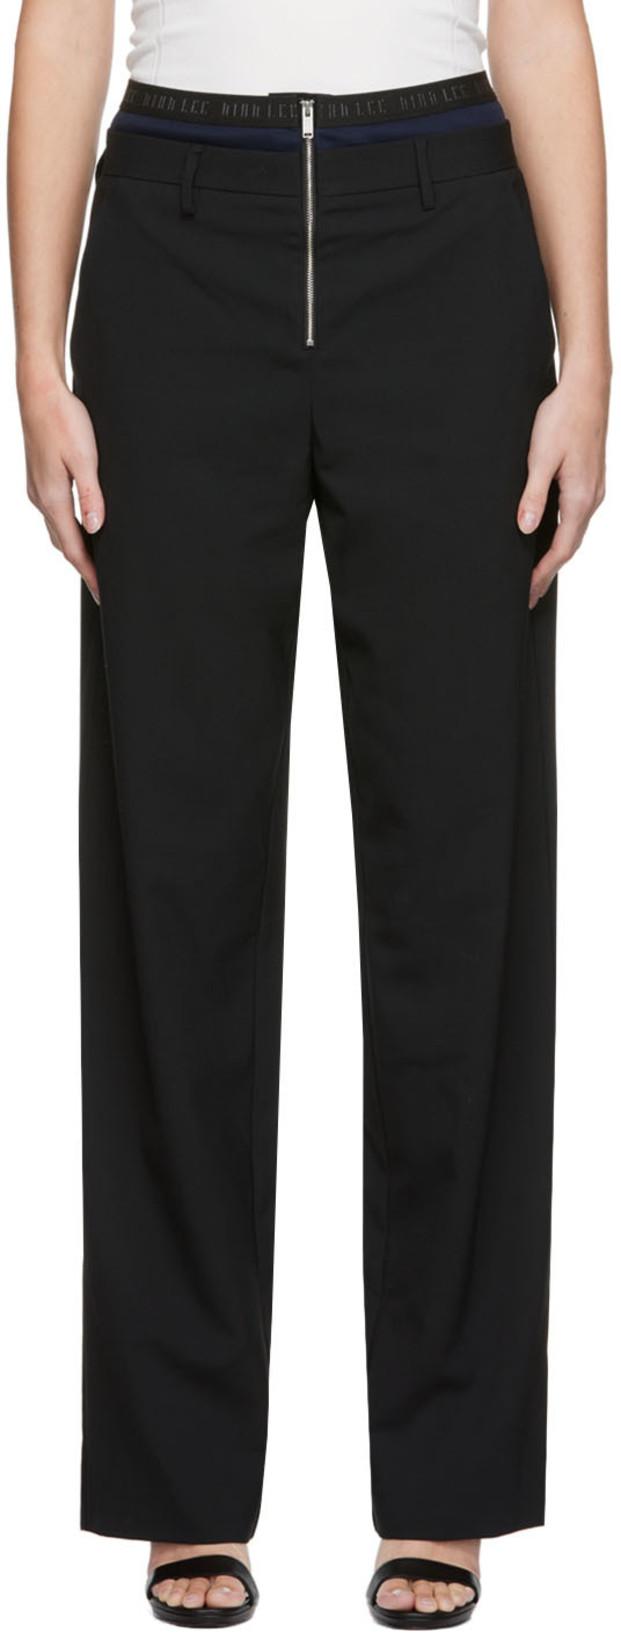 SSENSE EXCLUSIVE Black Layered Trousers by DION LEE